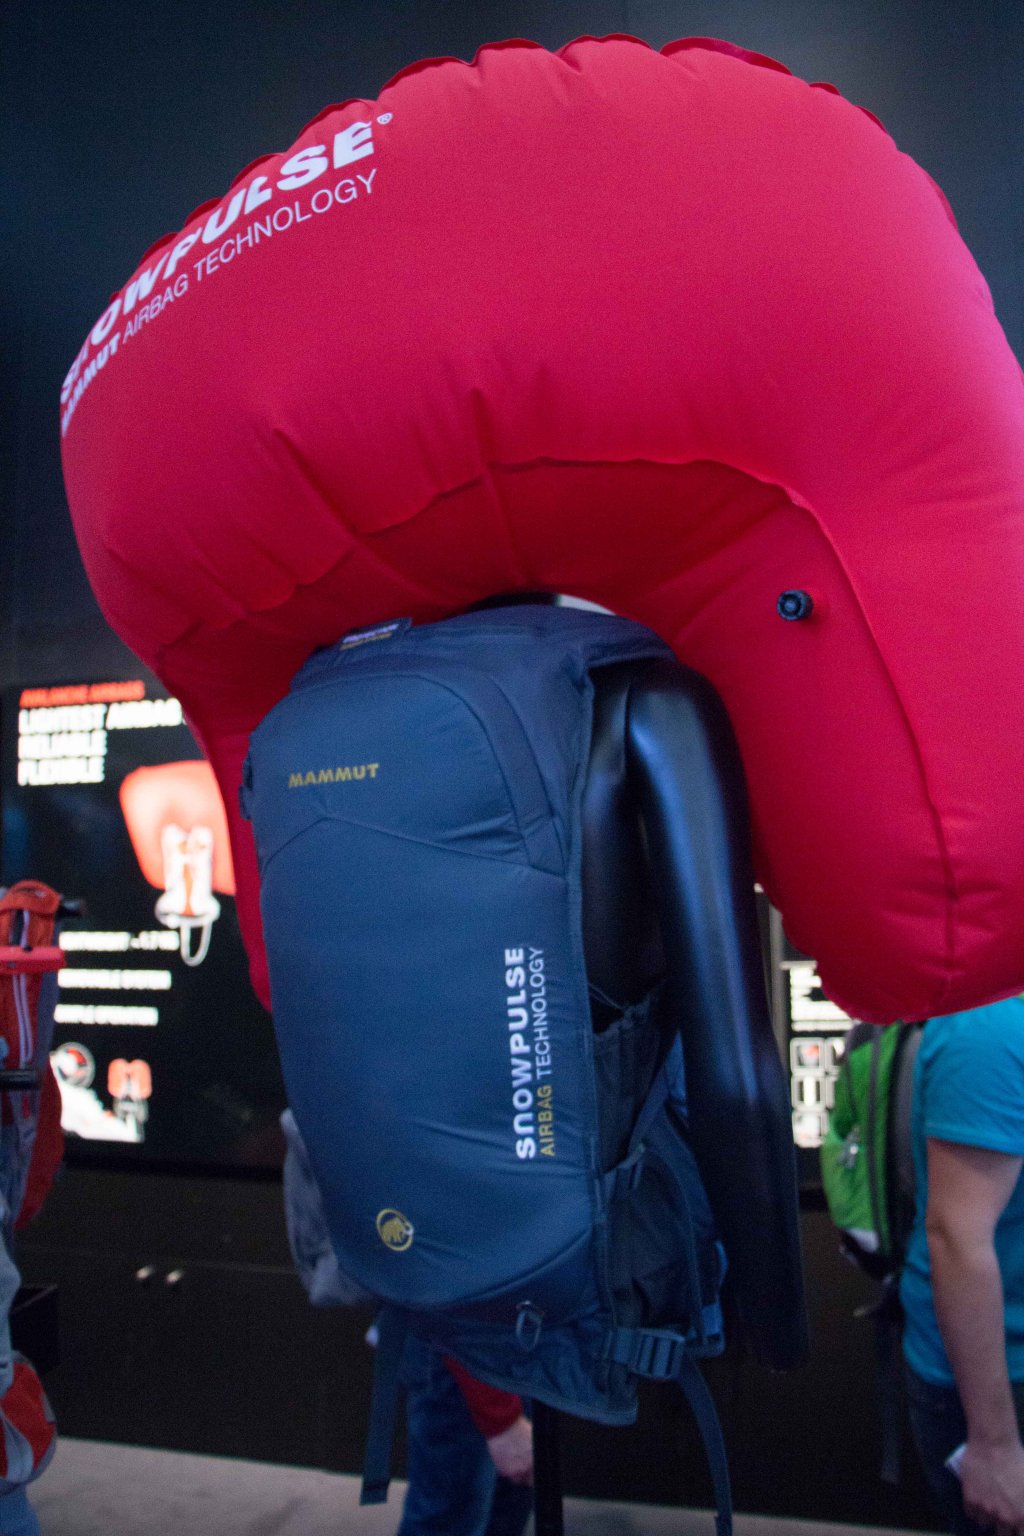 Mammut Airbag Backpack: Protection Airbag System